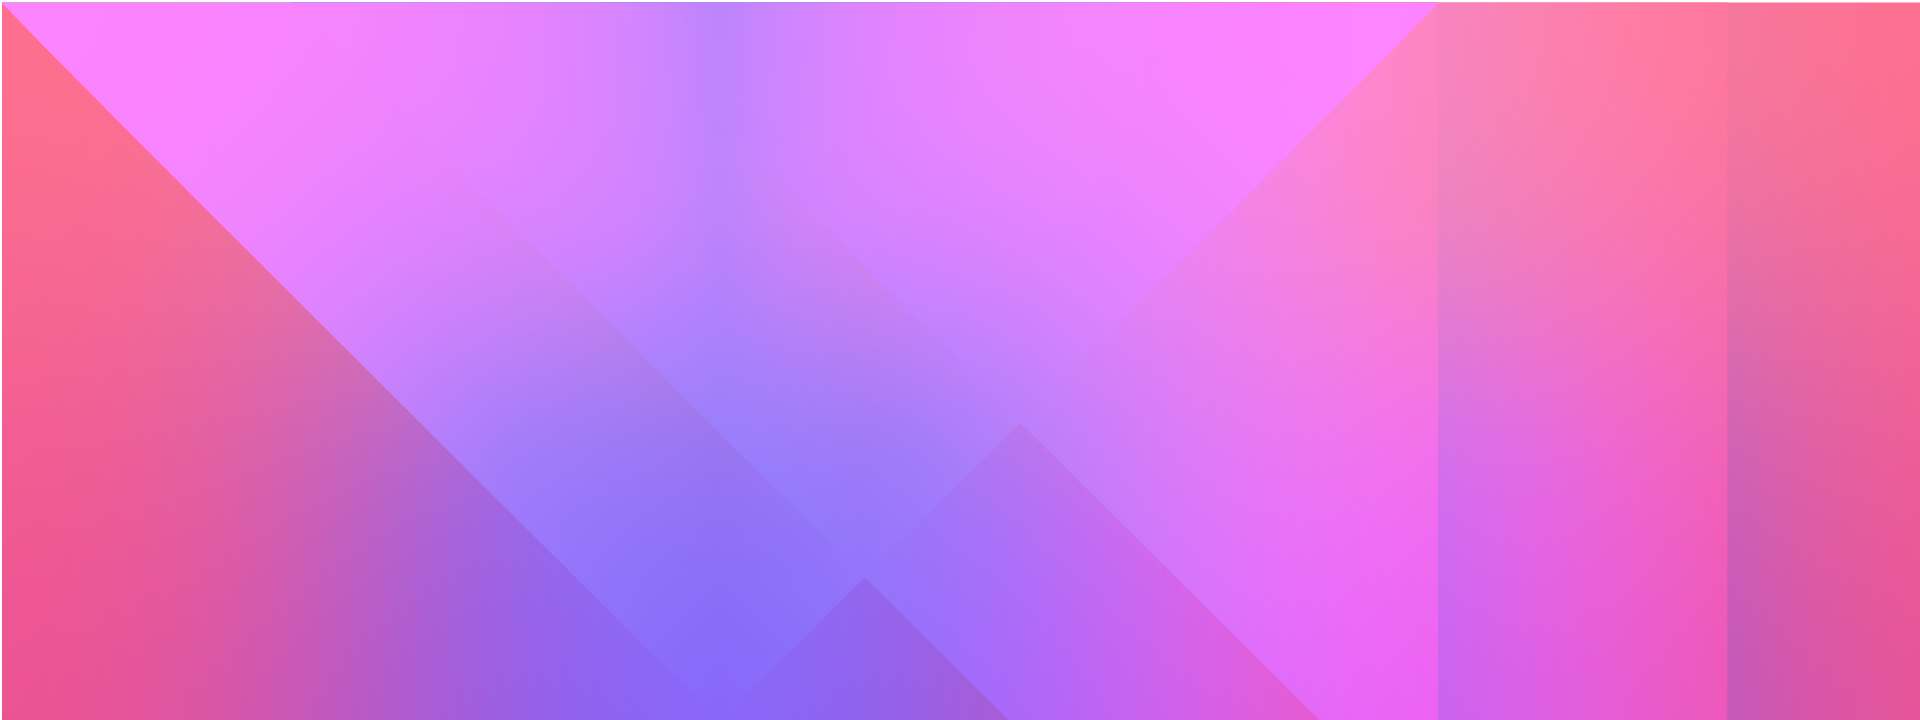 abstract pattern with gradients of pink and purple